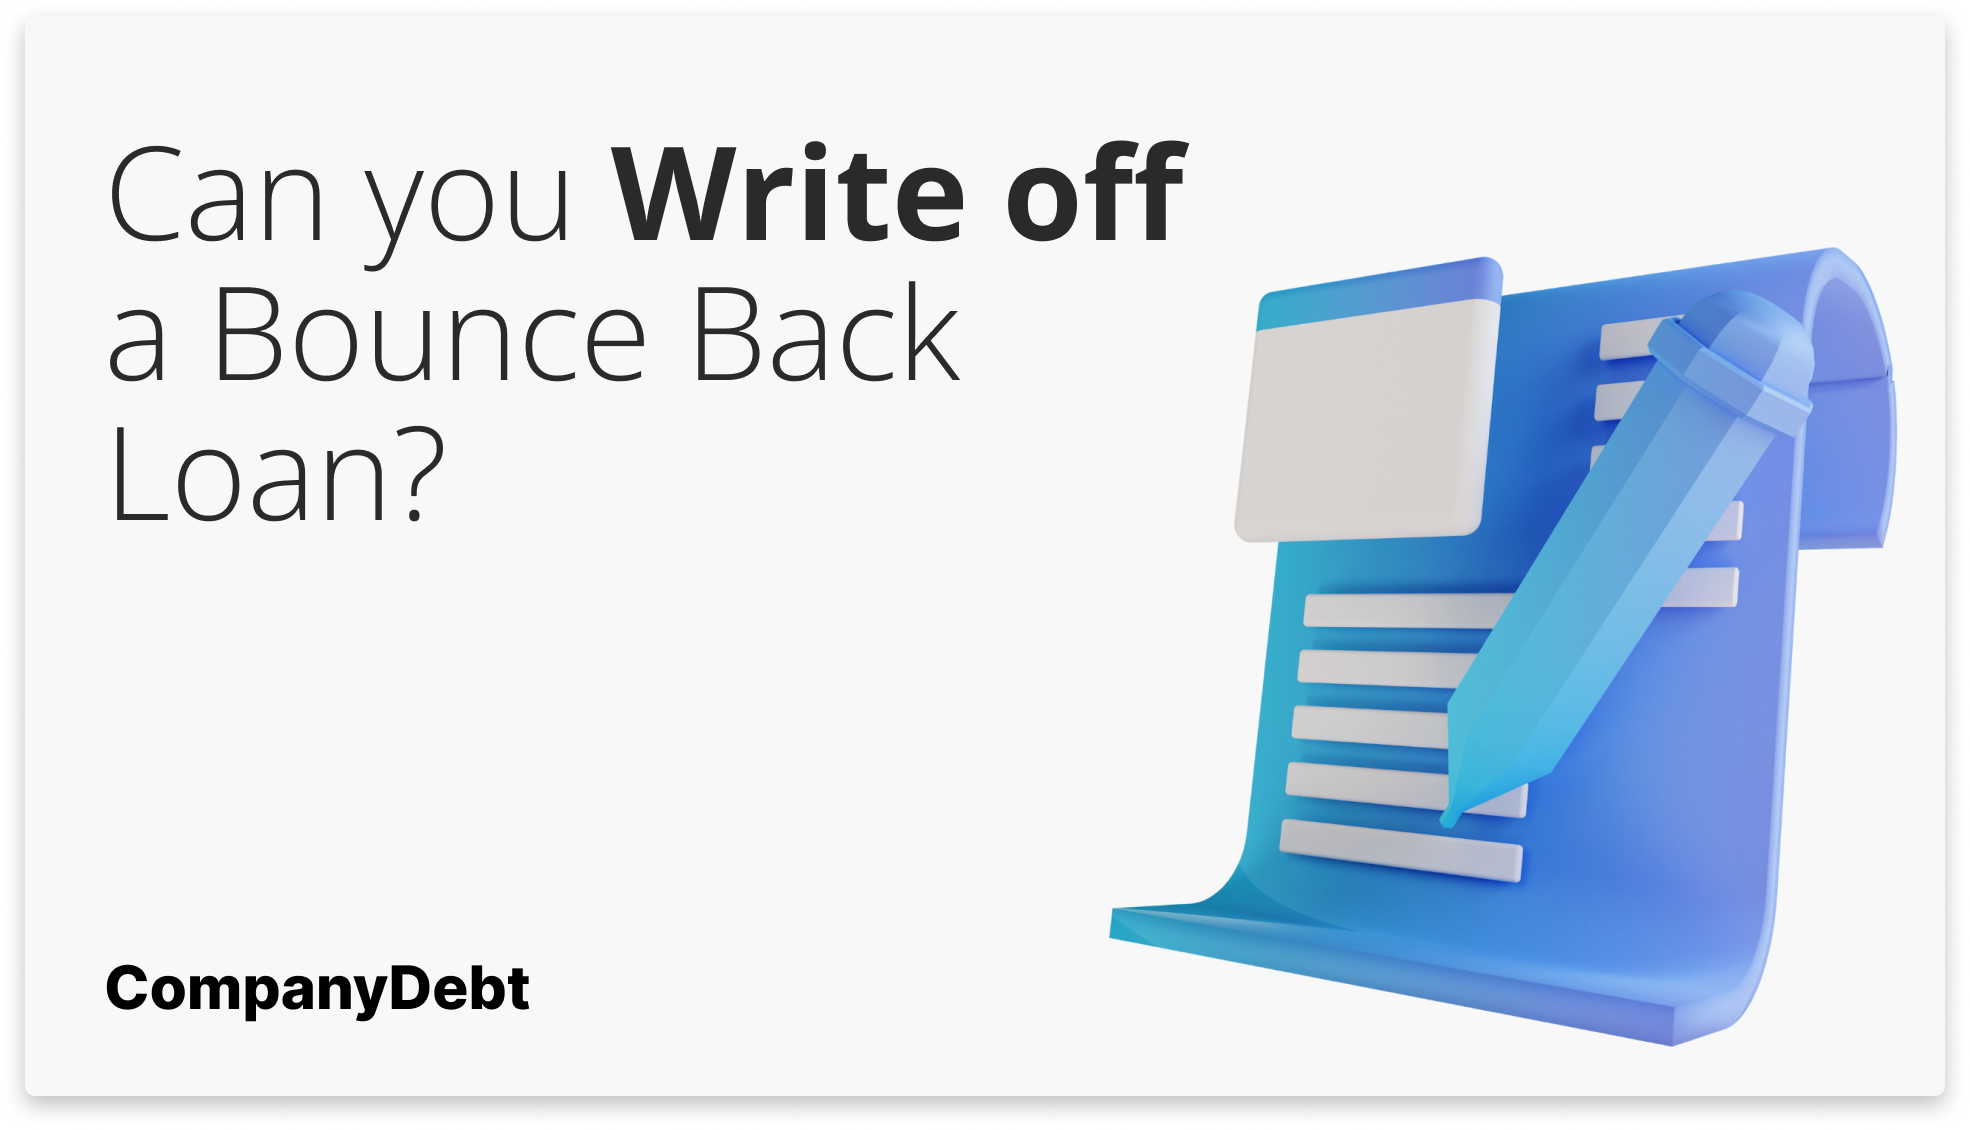 Can you Write off a Bounce Back Loan?